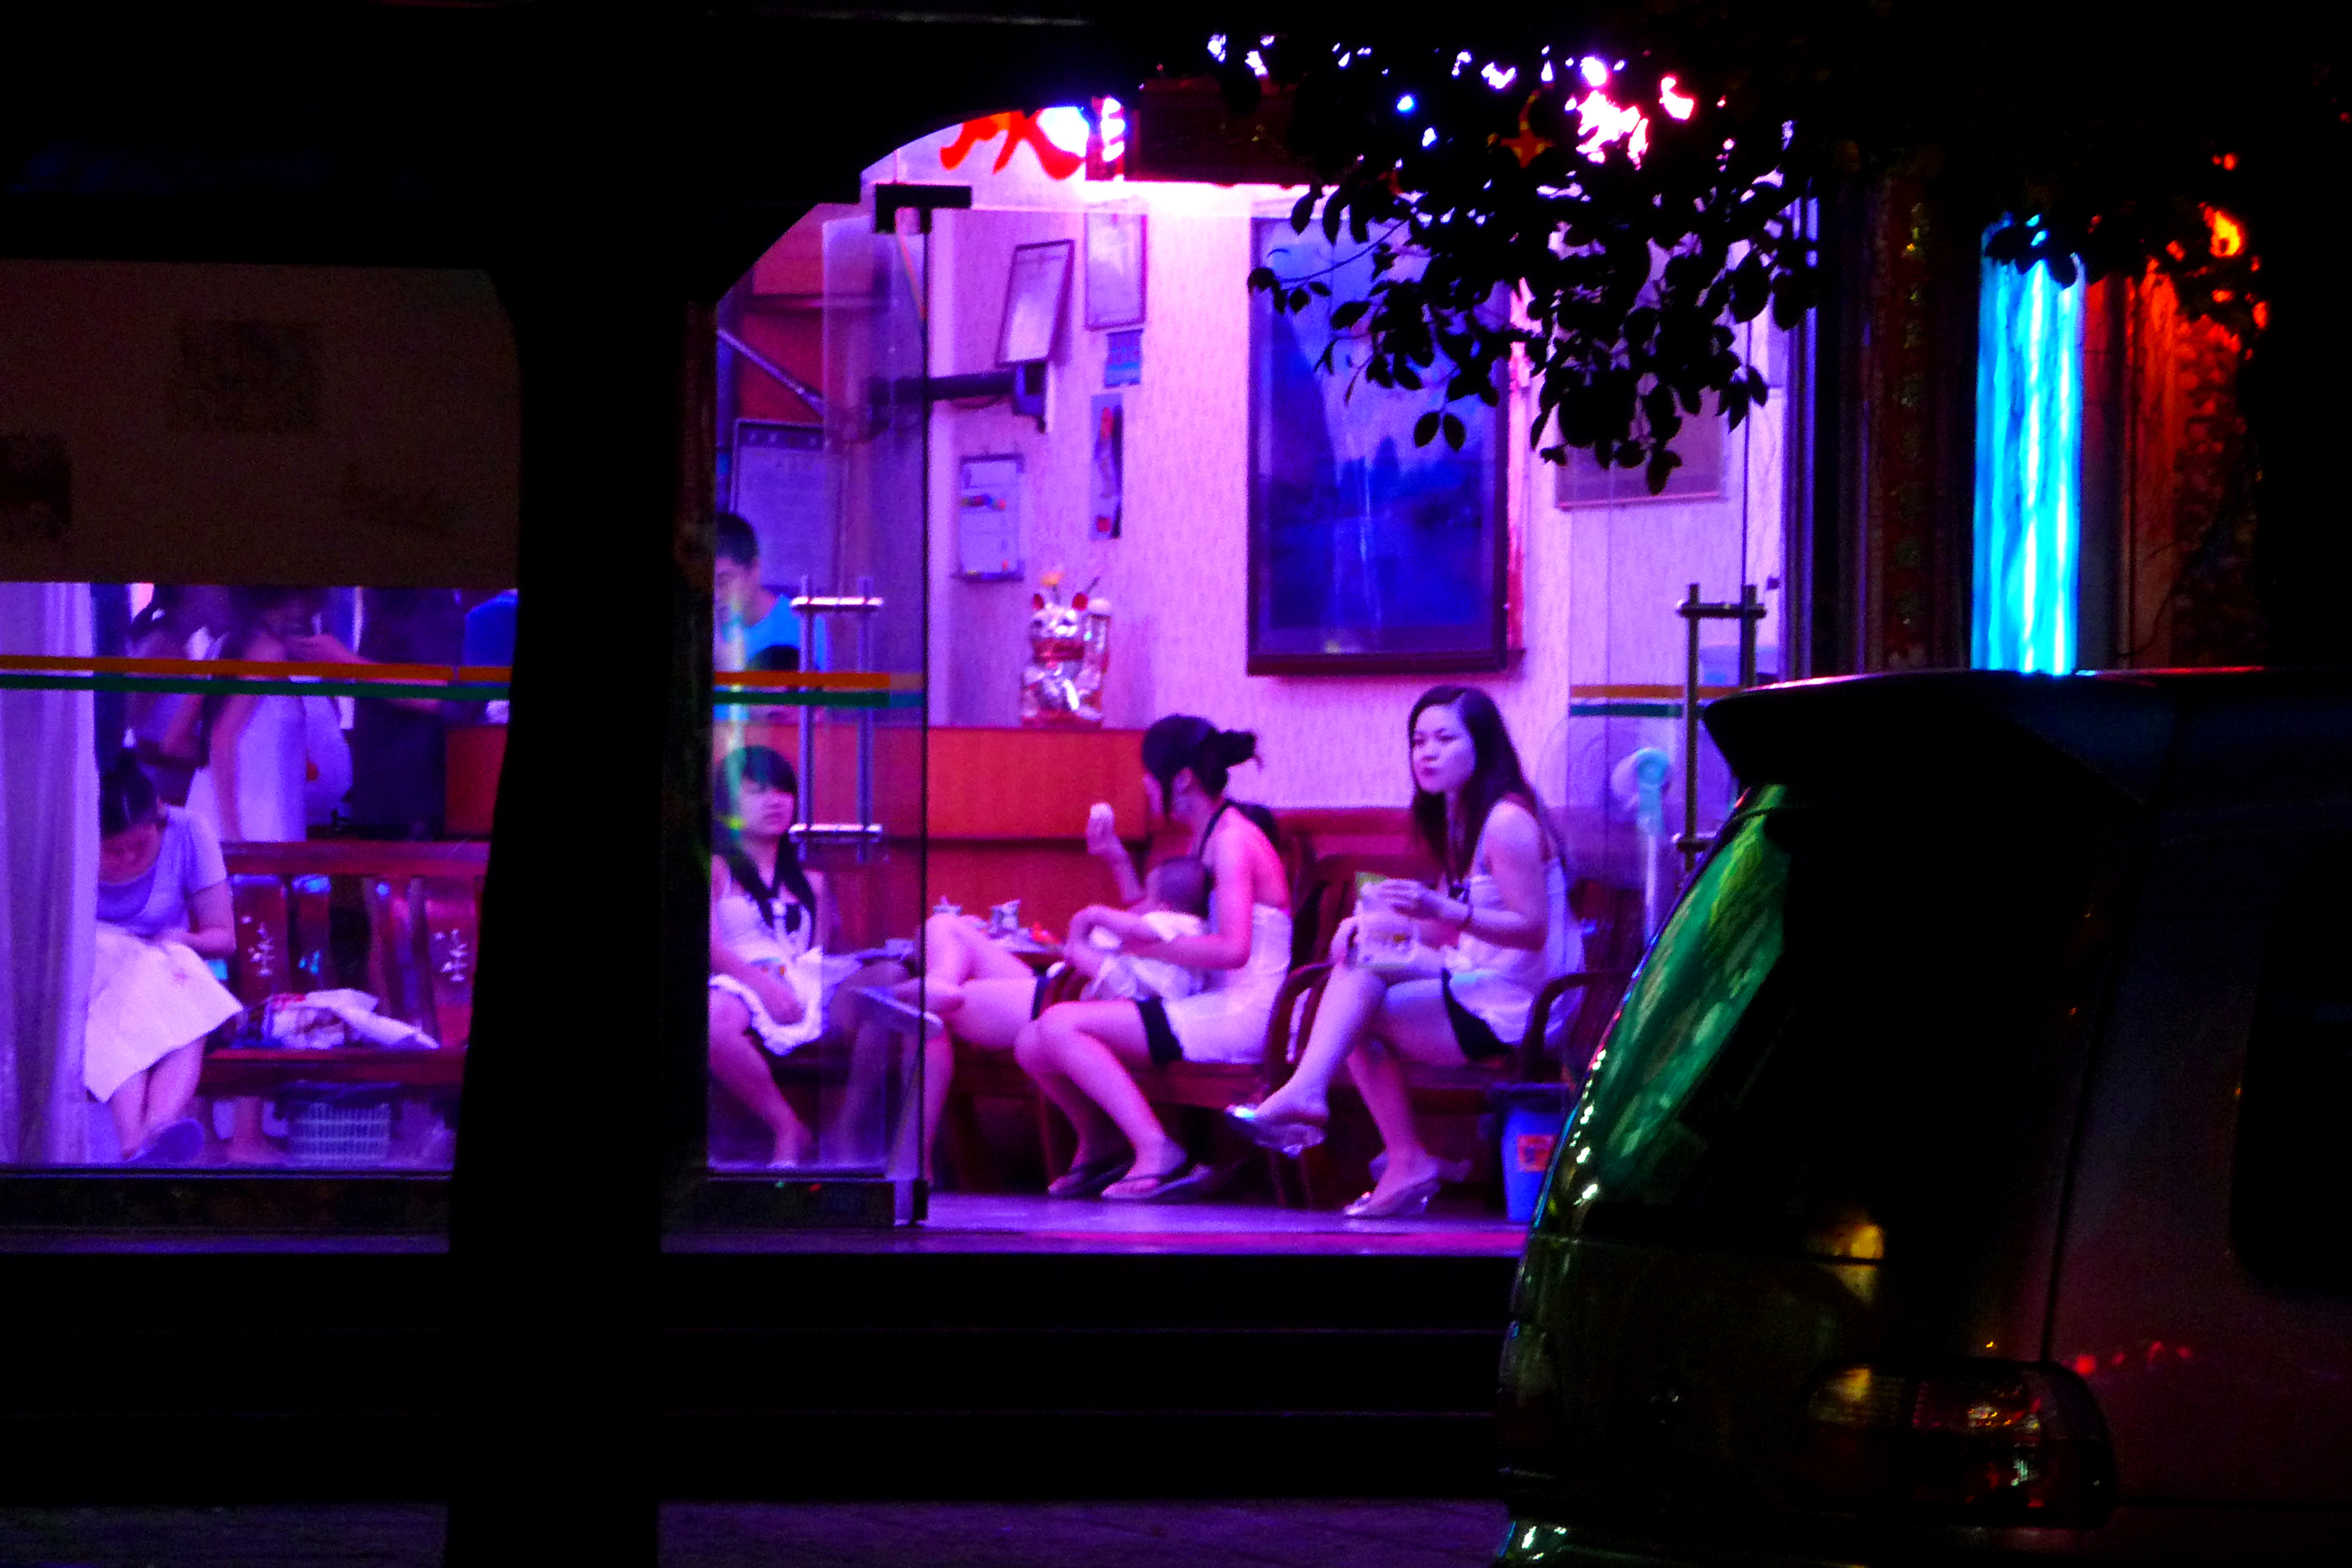 Car and sex in Shenzhen